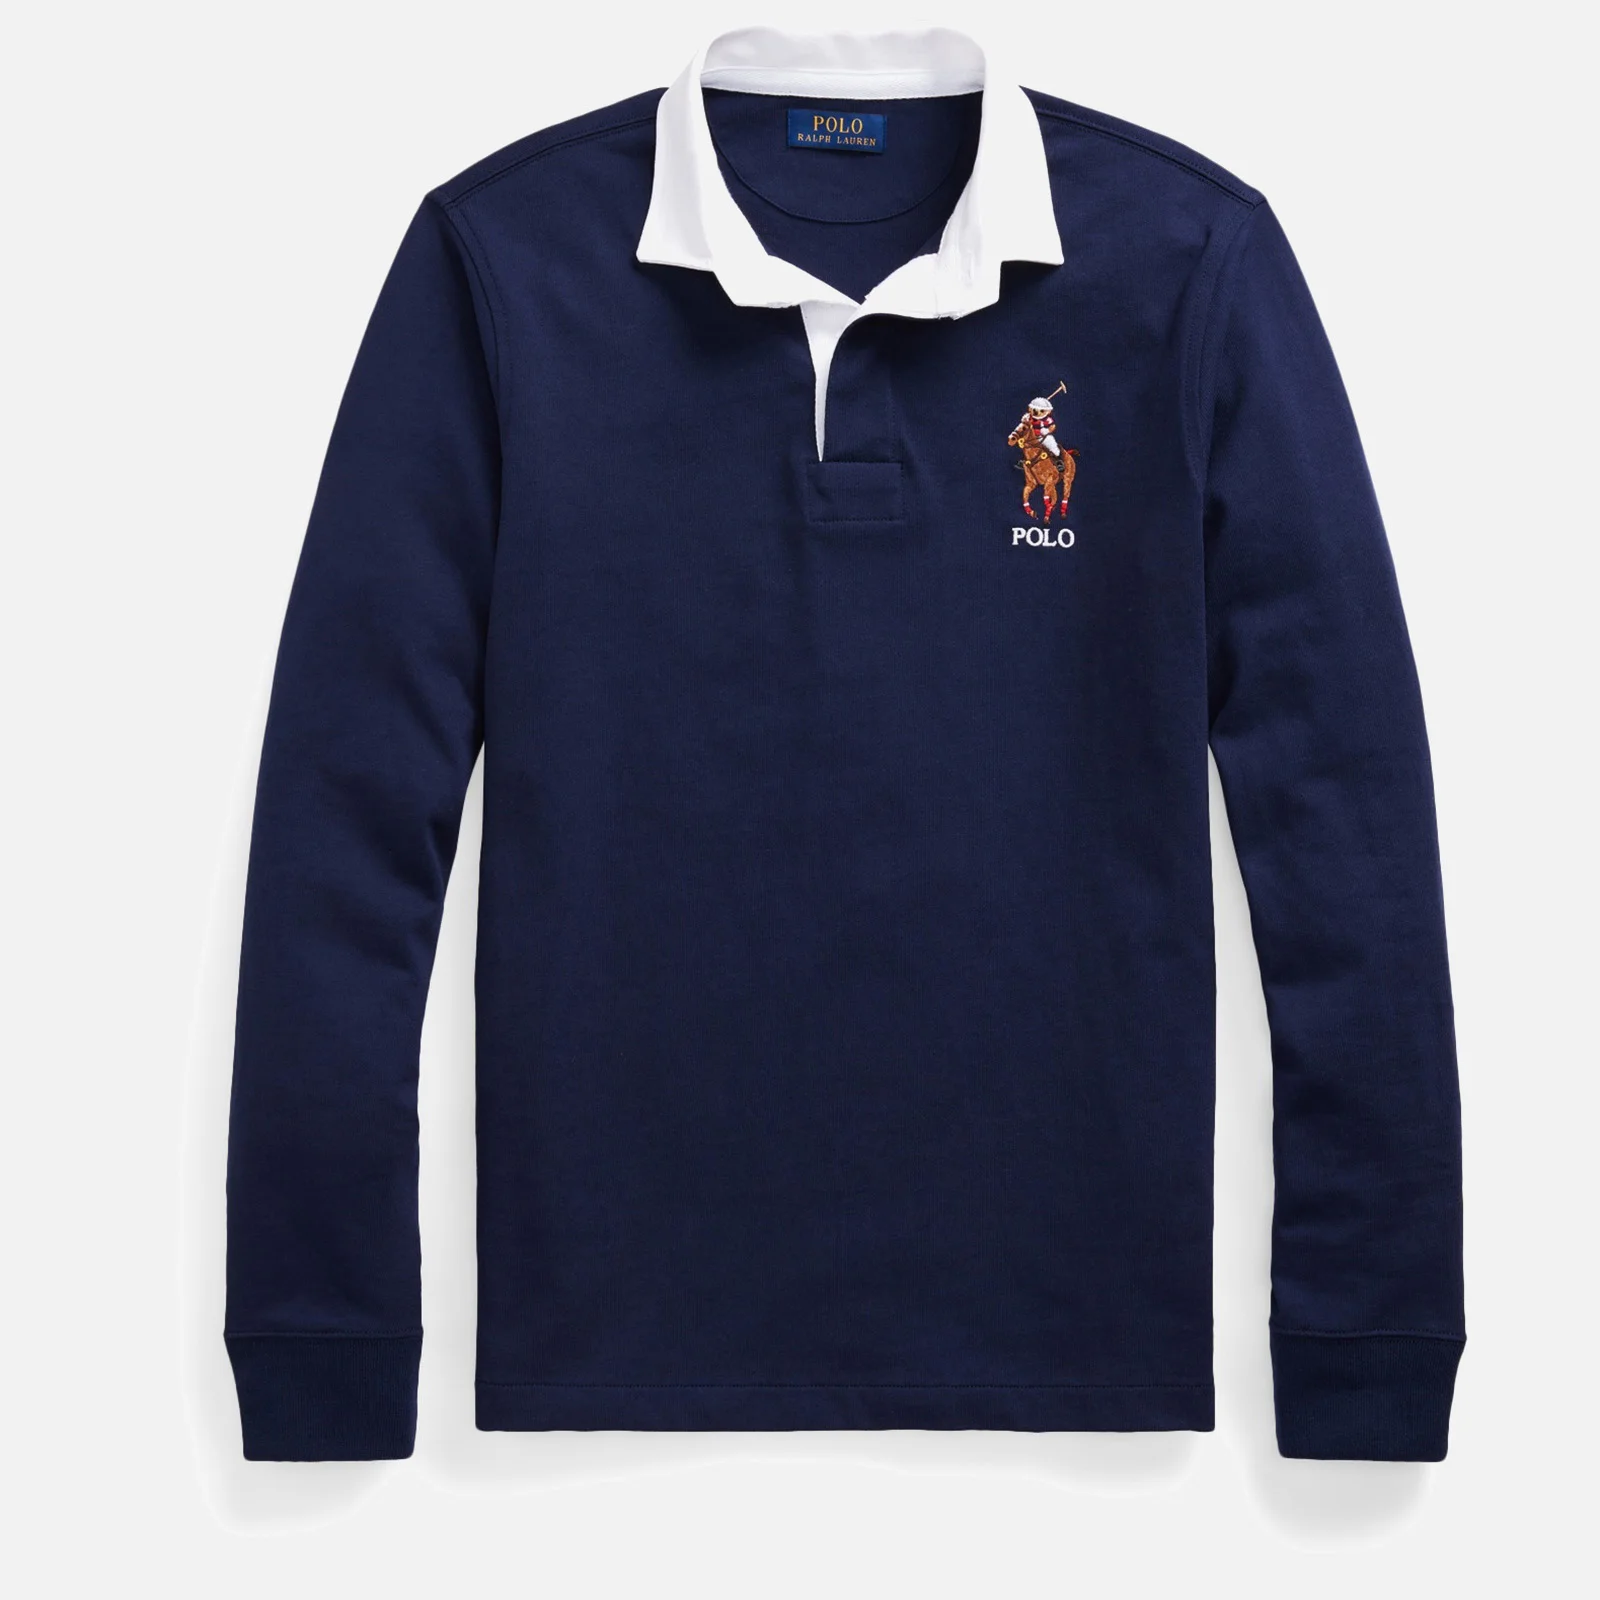 Polo Ralph Lauren Men's Polo Bear Player Rugby Top - French Navy Image 1